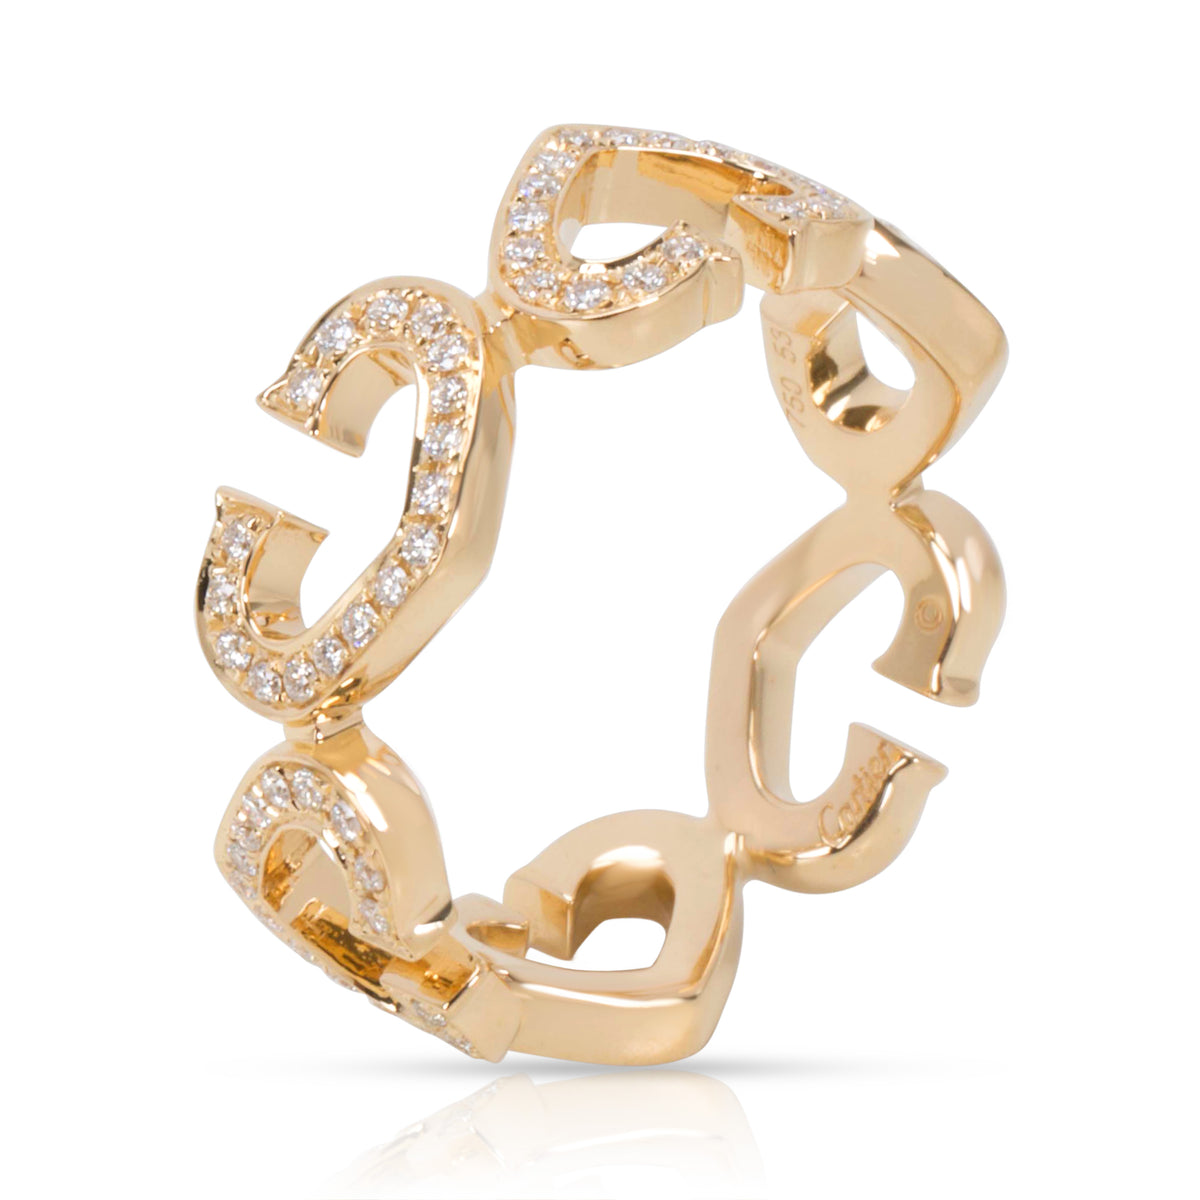 Cartier C Hearts of Cartier Diamond Ring in 18K Yellow Gold, 0.50 Ctw